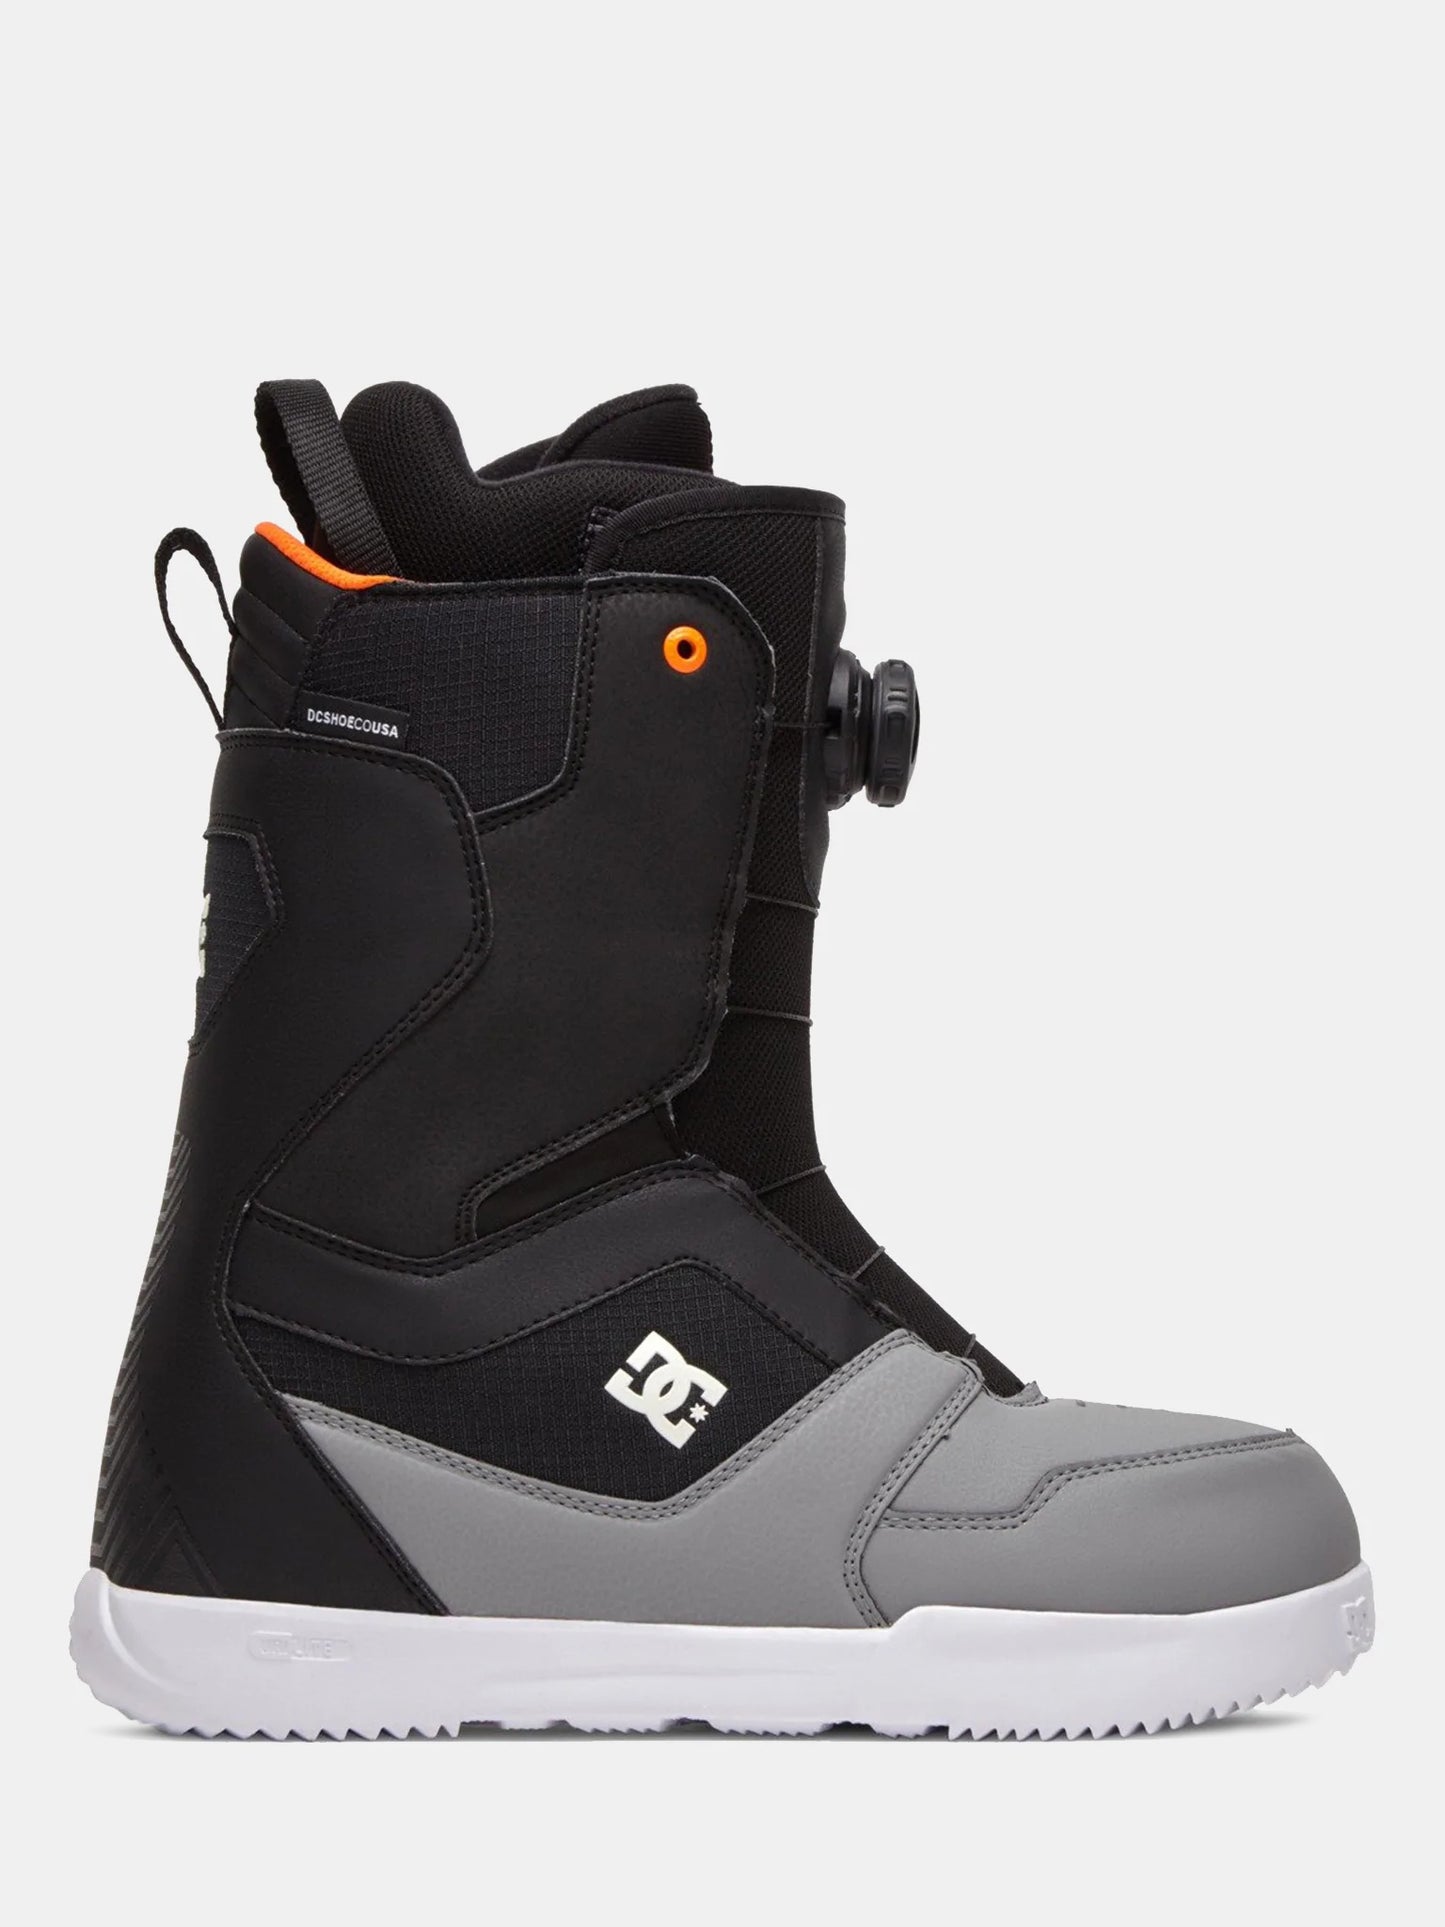 DC Scout Boa Snowboard Boots 2021